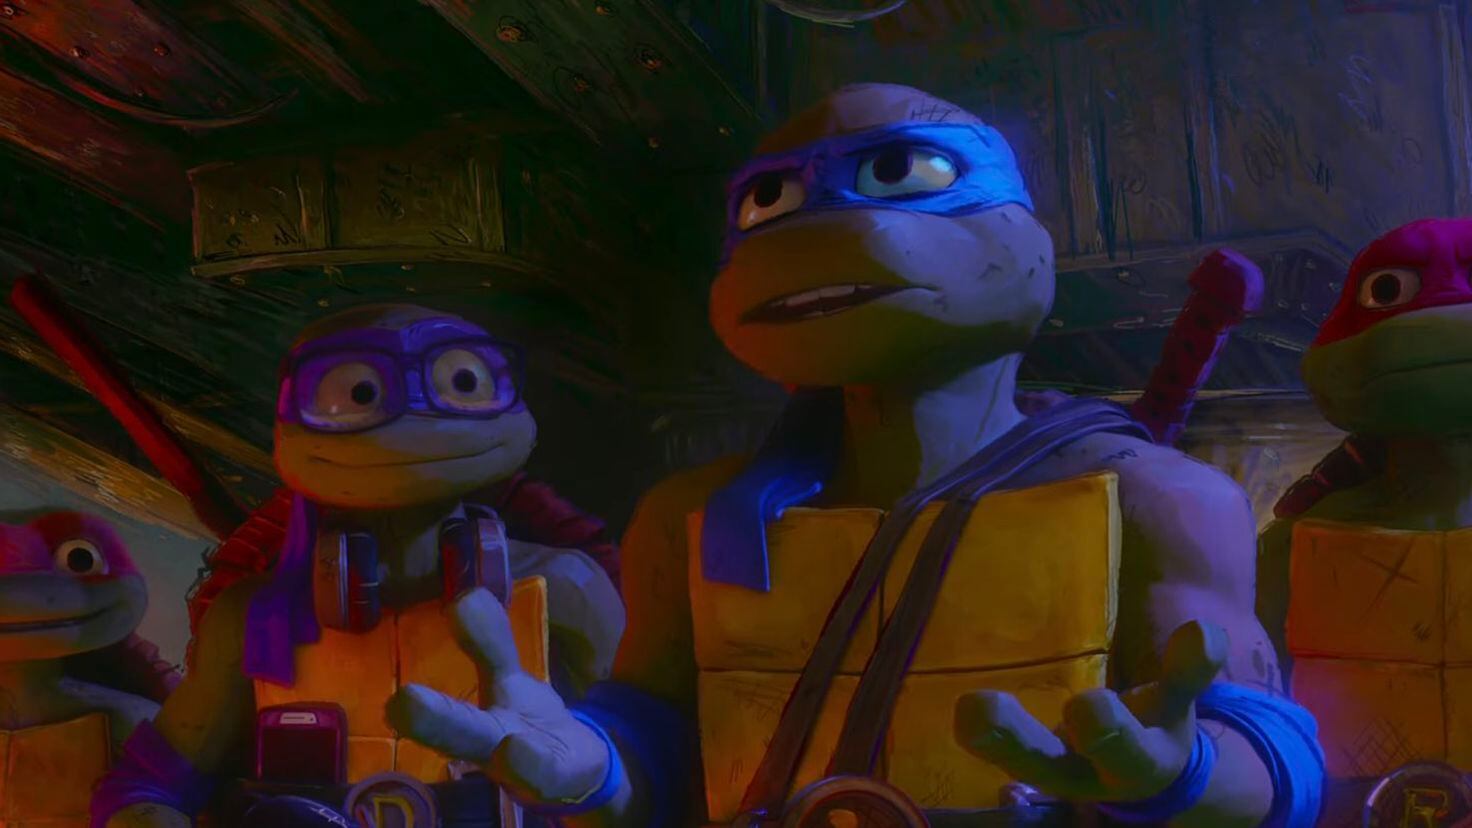 The amount of variety in Rise of the Teenage Mutant Ninja Turtle's